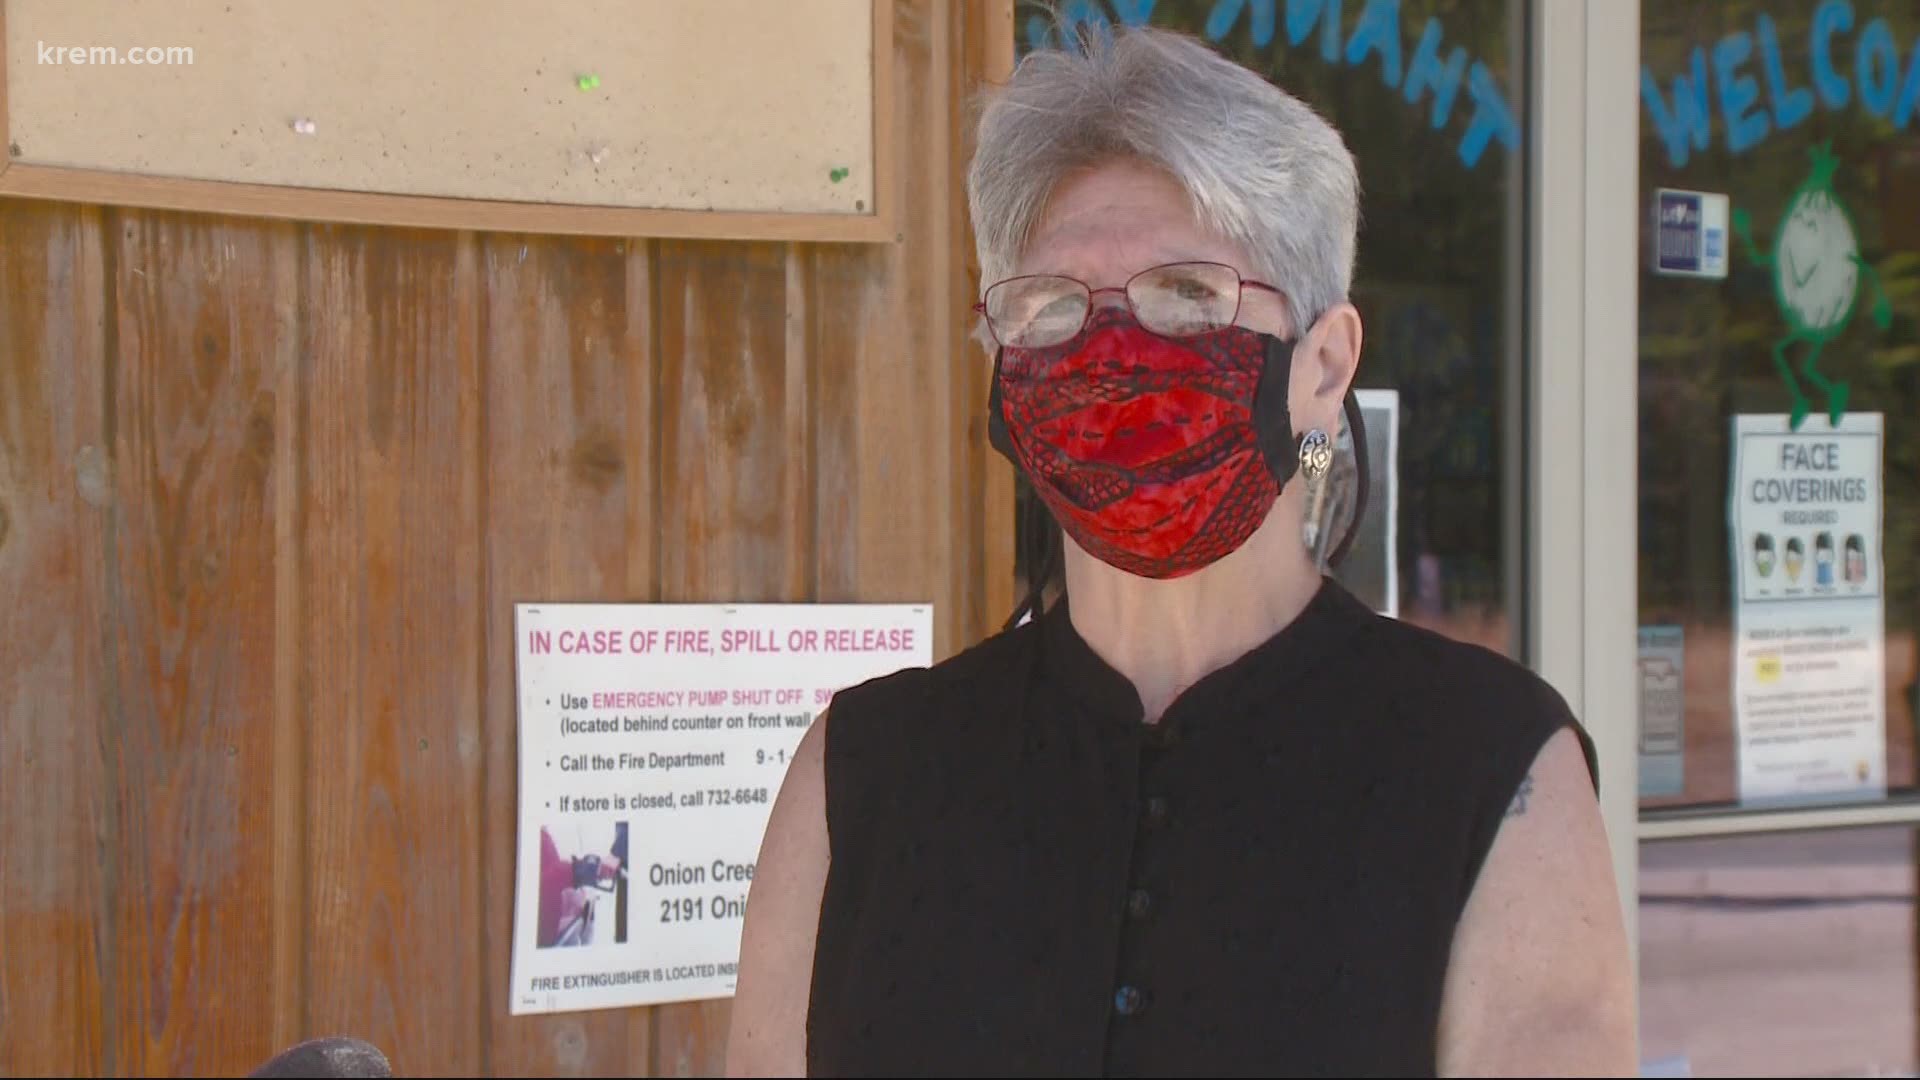 Lynette Young, a woman living in Northport, Washington, has made about 3,700 free, reusable masks since the start of the pandemic.